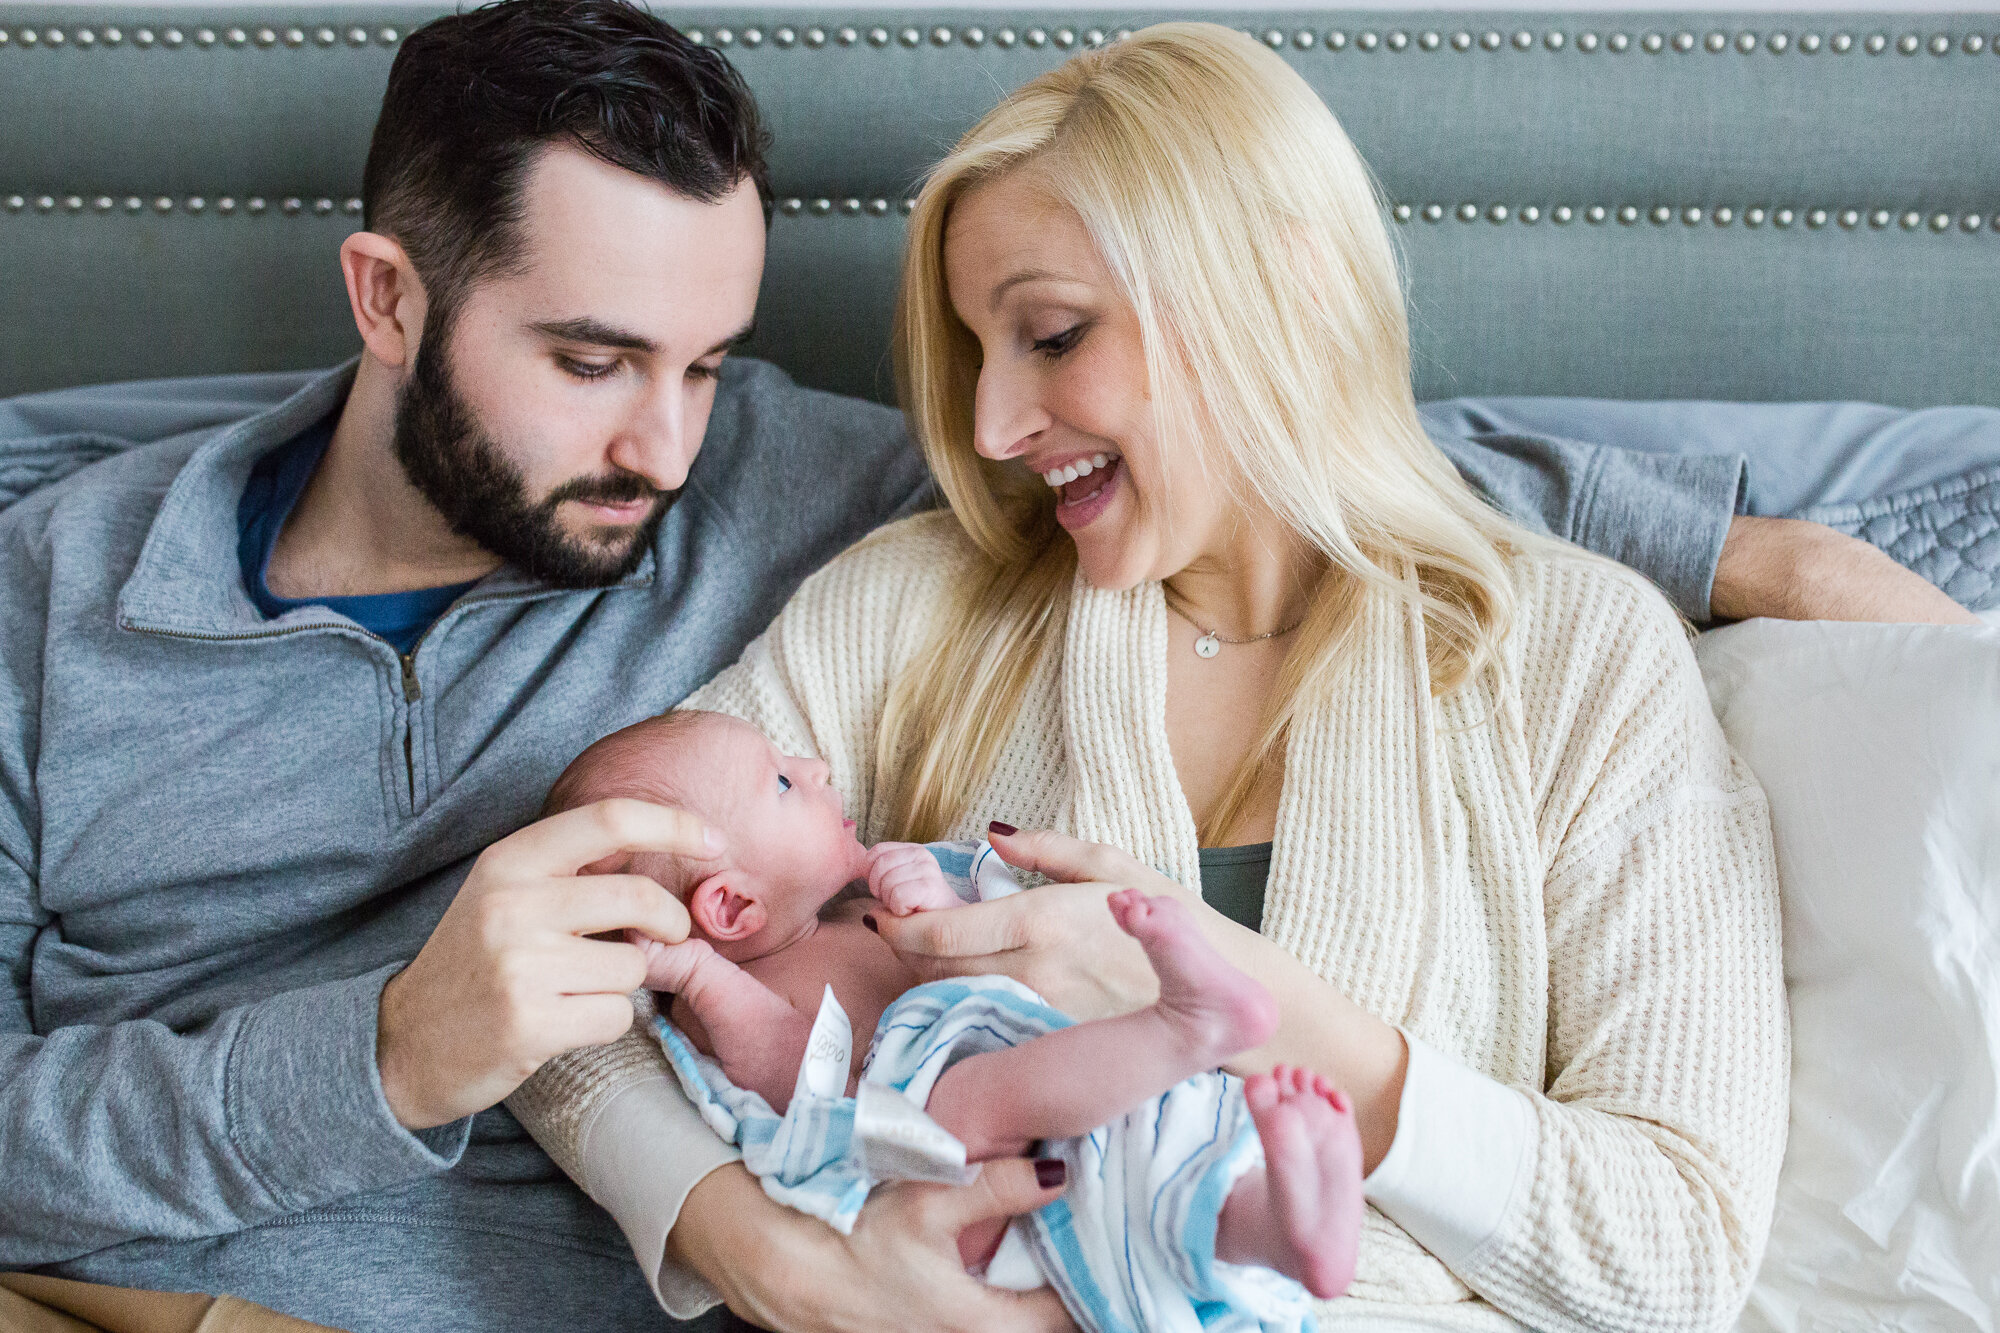 Baby boy in a blanket rests in mom's arms as she smiles at him and dad marvels at his tiny fingers, Philadelphia Newborn Photographer